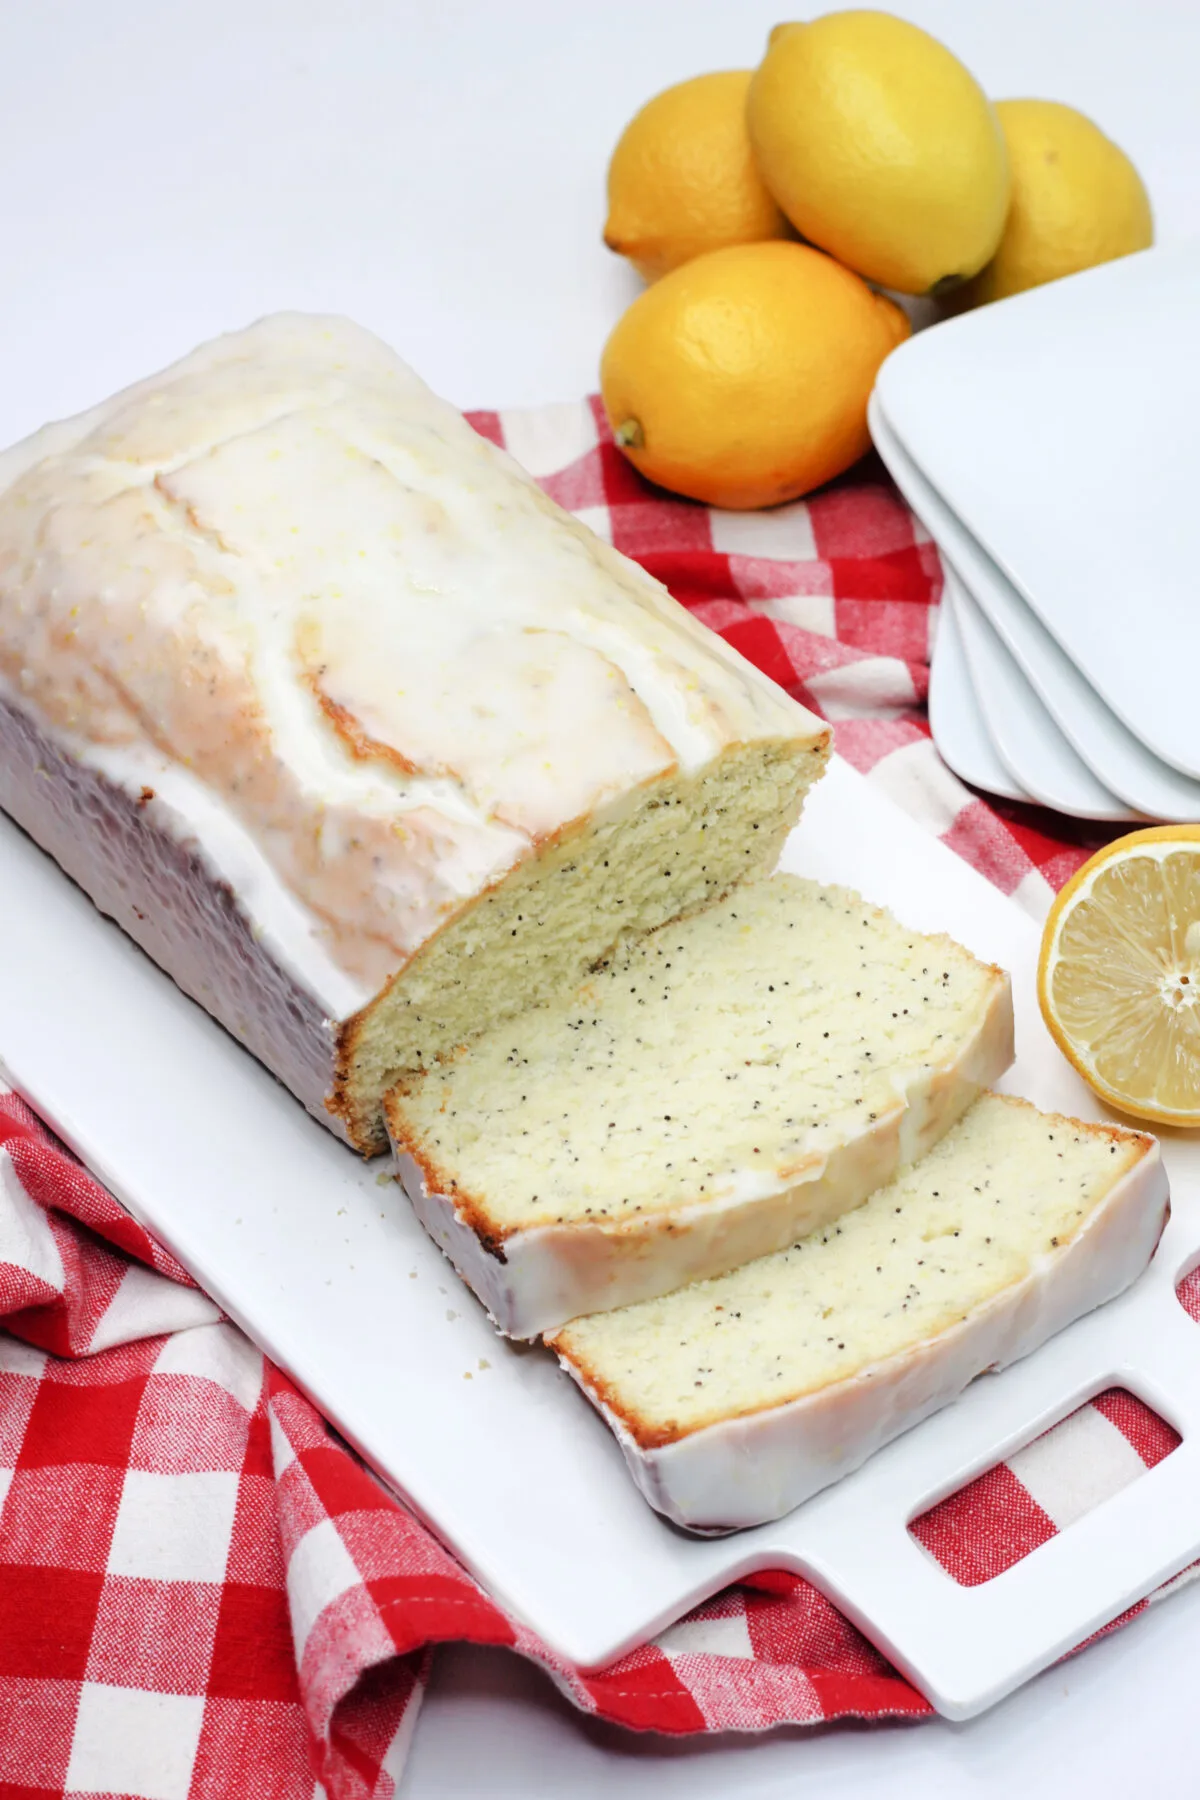 This quick and easy lemon poppy seed bread recipe is so good, it's the perfect blend of sweet and tangy with a moist and tender crumb.